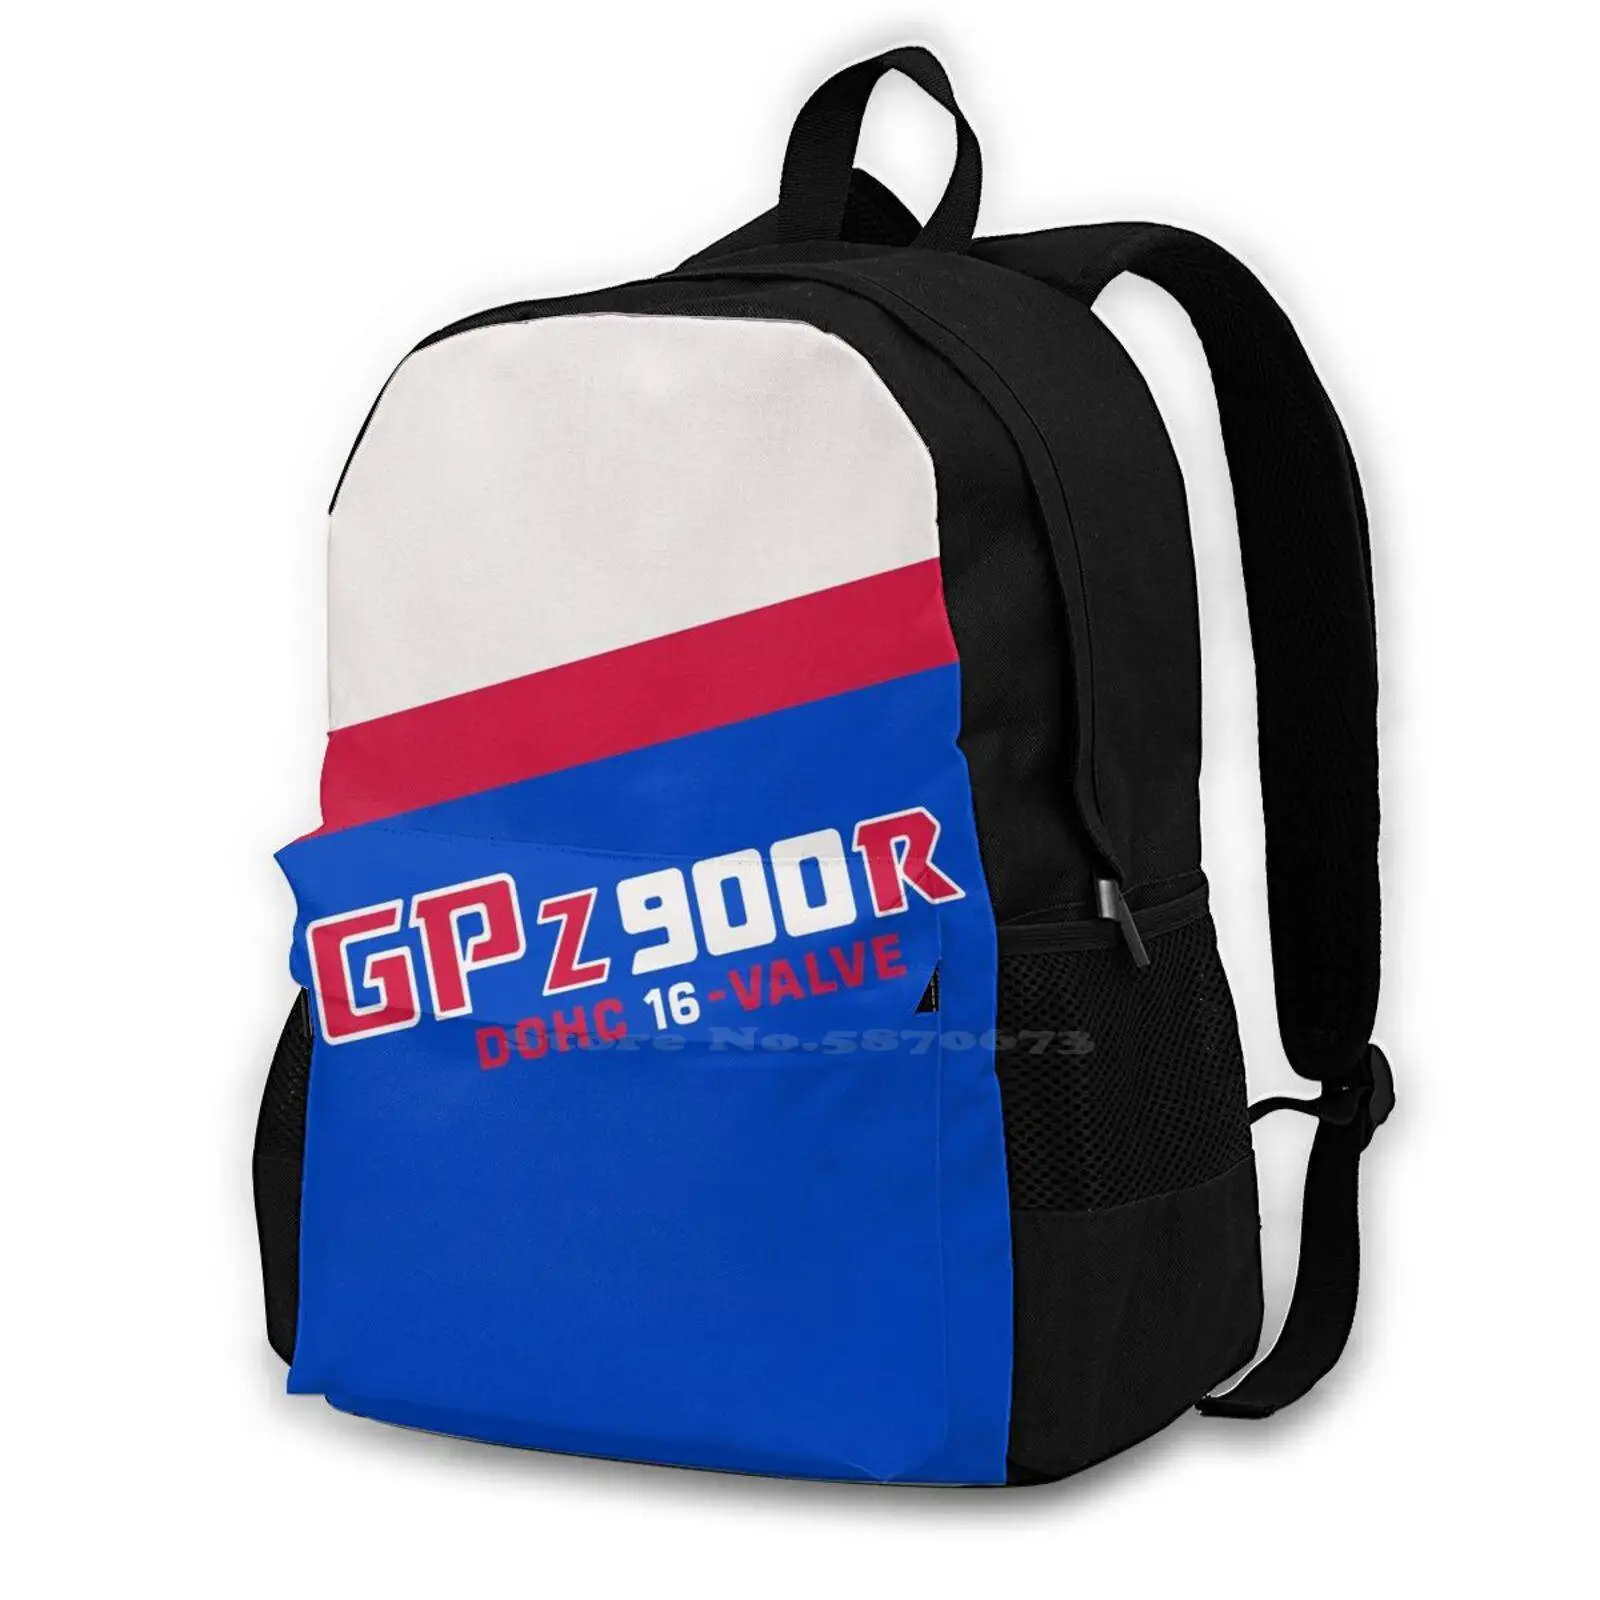 

Gpz 900R Custom Made Color Spec Design With Side Emblem Gray On Blue Backpacks For Men Women Teenagers Girls Bags Gpz 900R 900